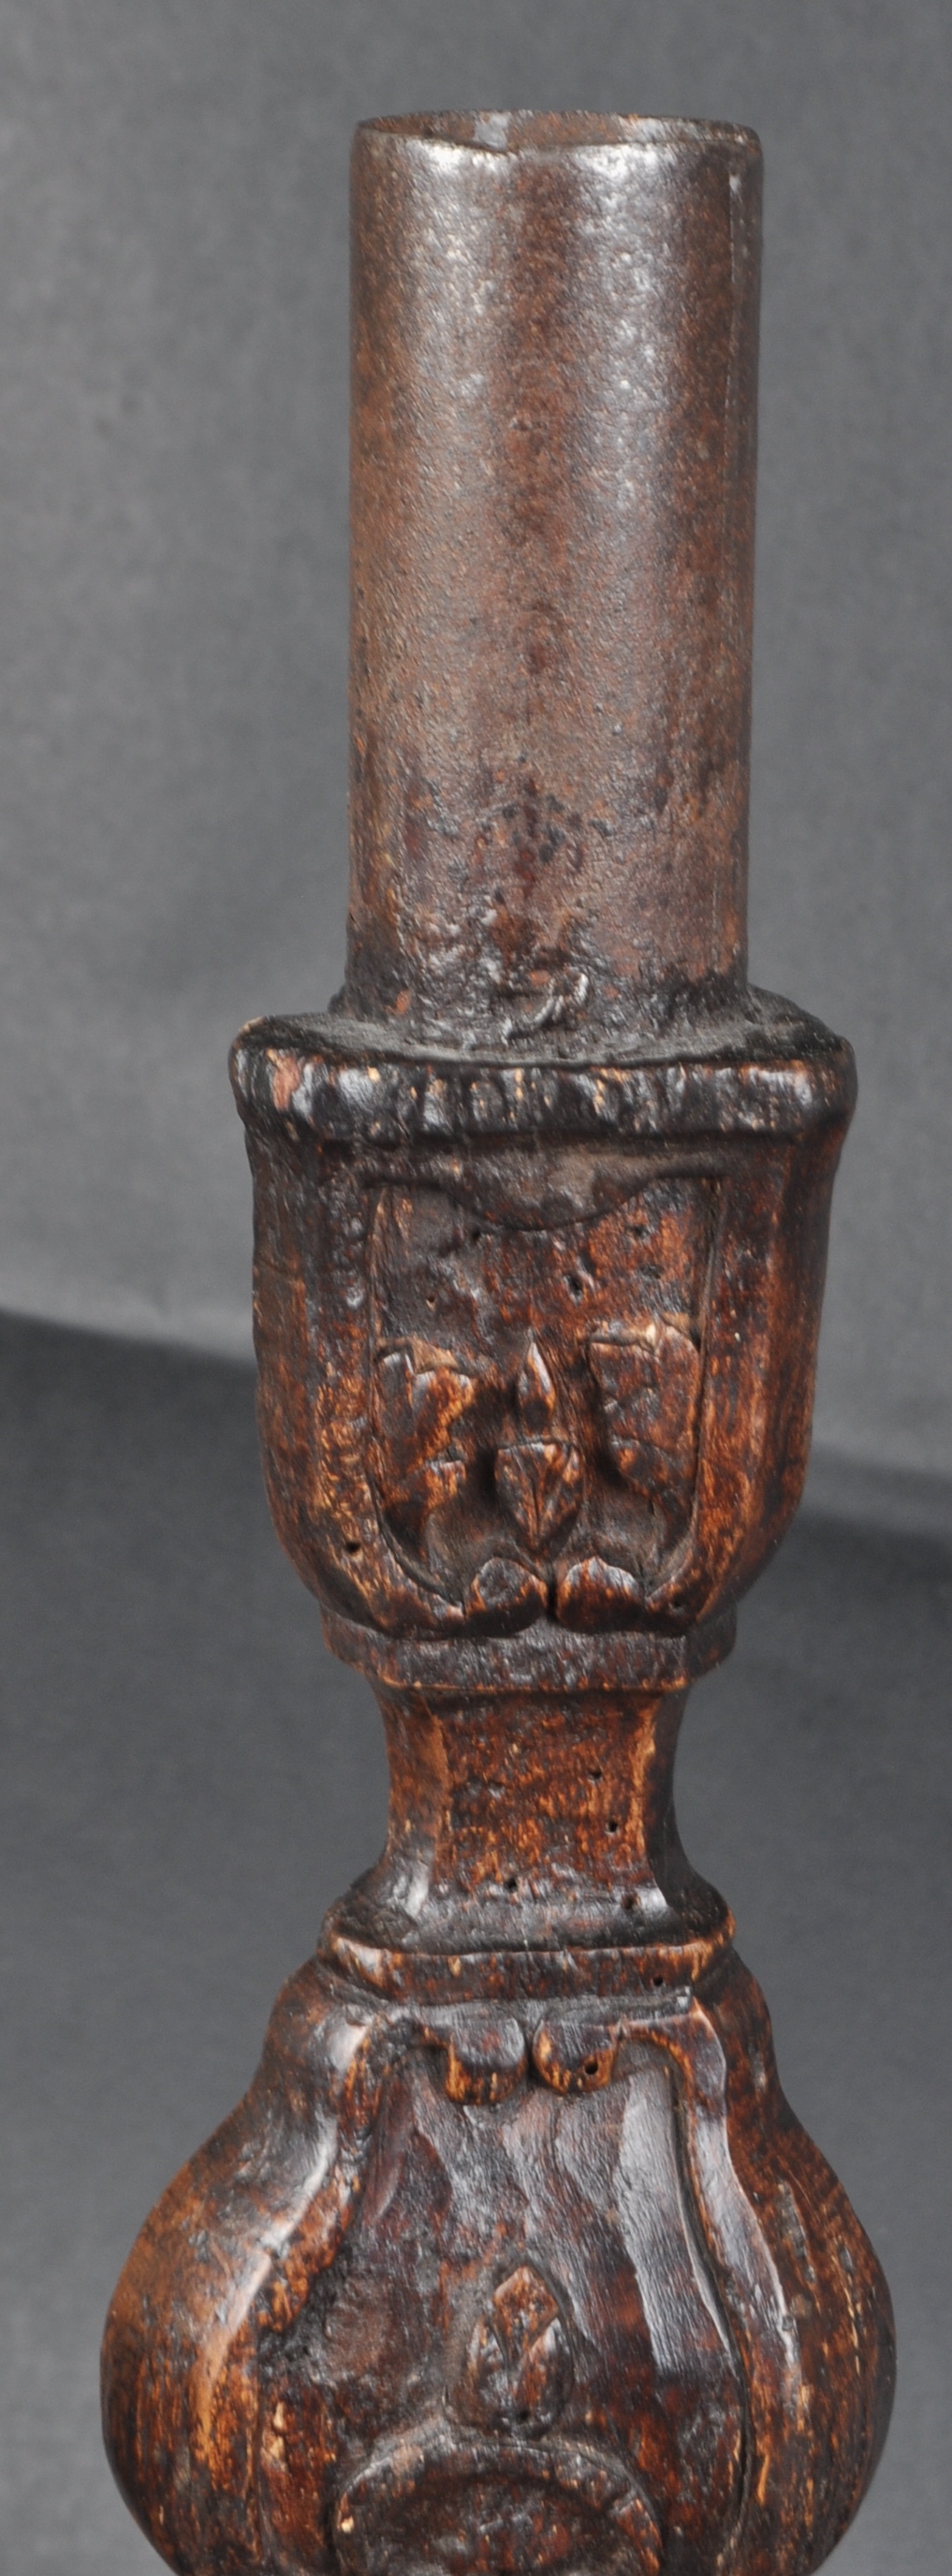 EARLY 18TH CENTURY OAK CARVED CHURCH ALTAR CANDLE HOLDER - Image 5 of 6